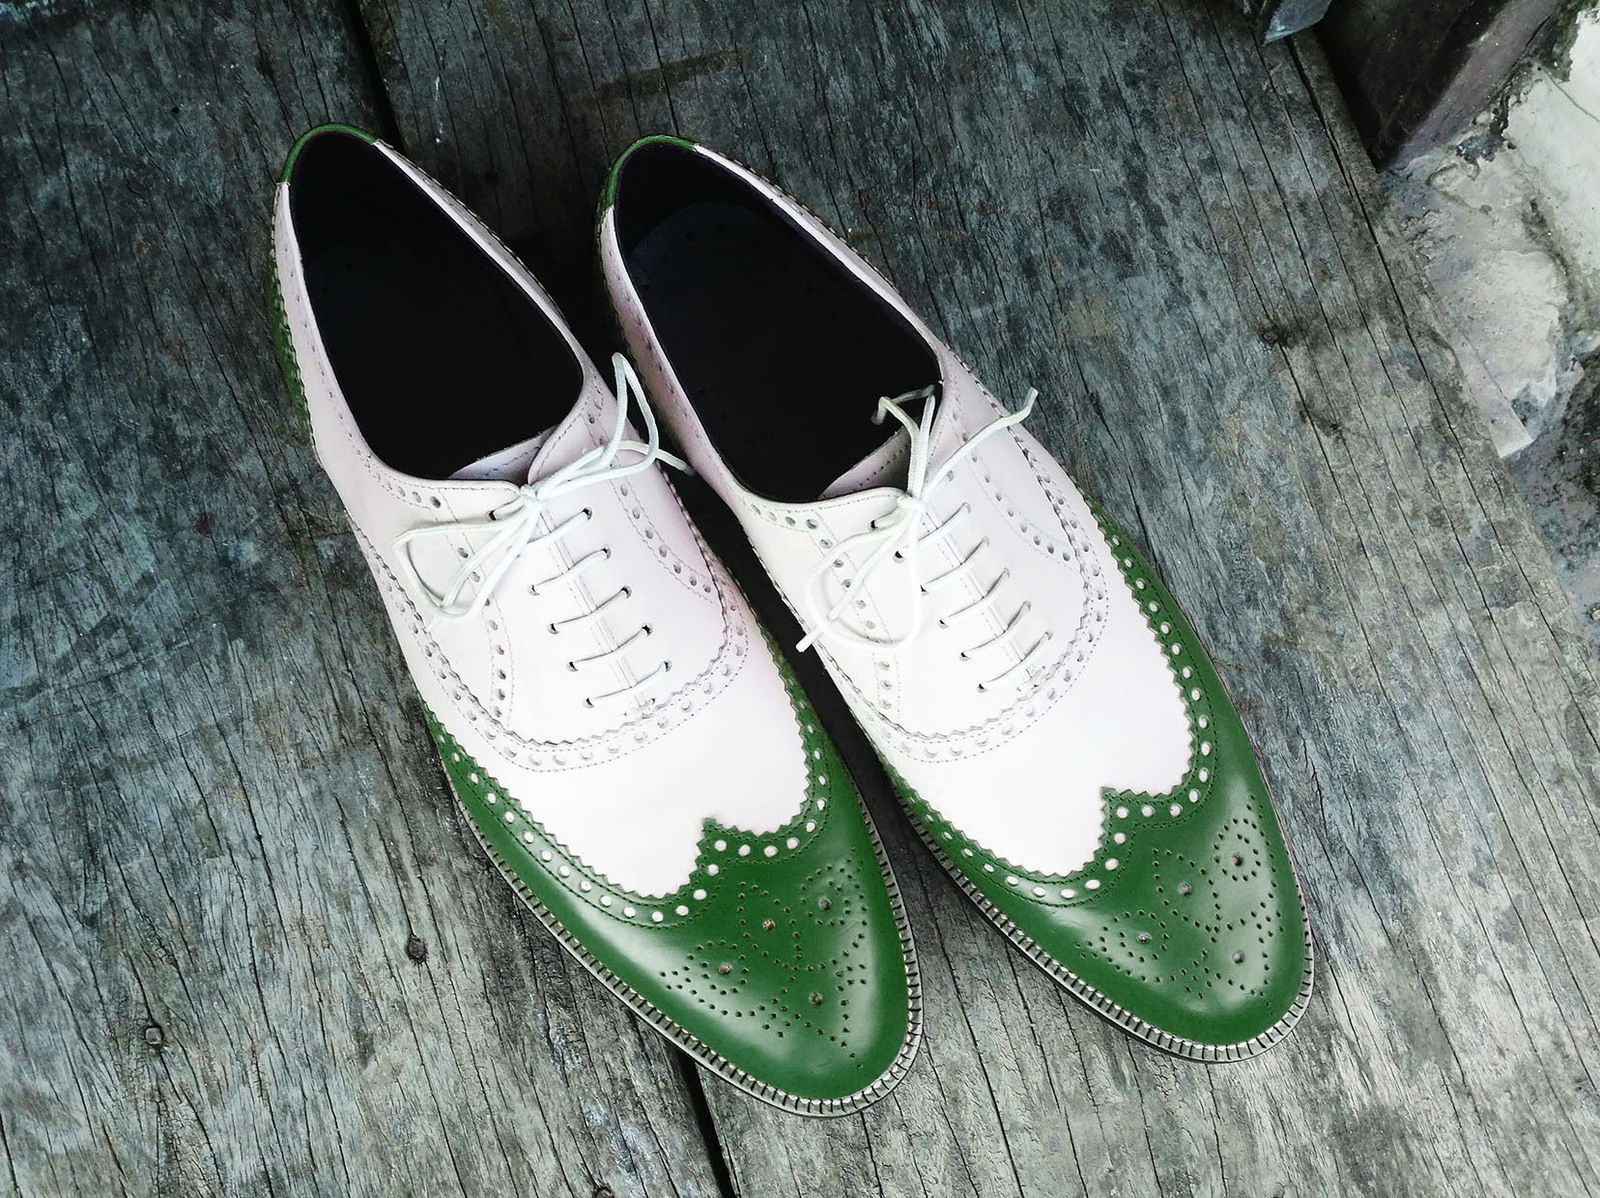 Oxford Leather Shoes Two Tone Green White Premium Quality Wing Tip Brogue Toe